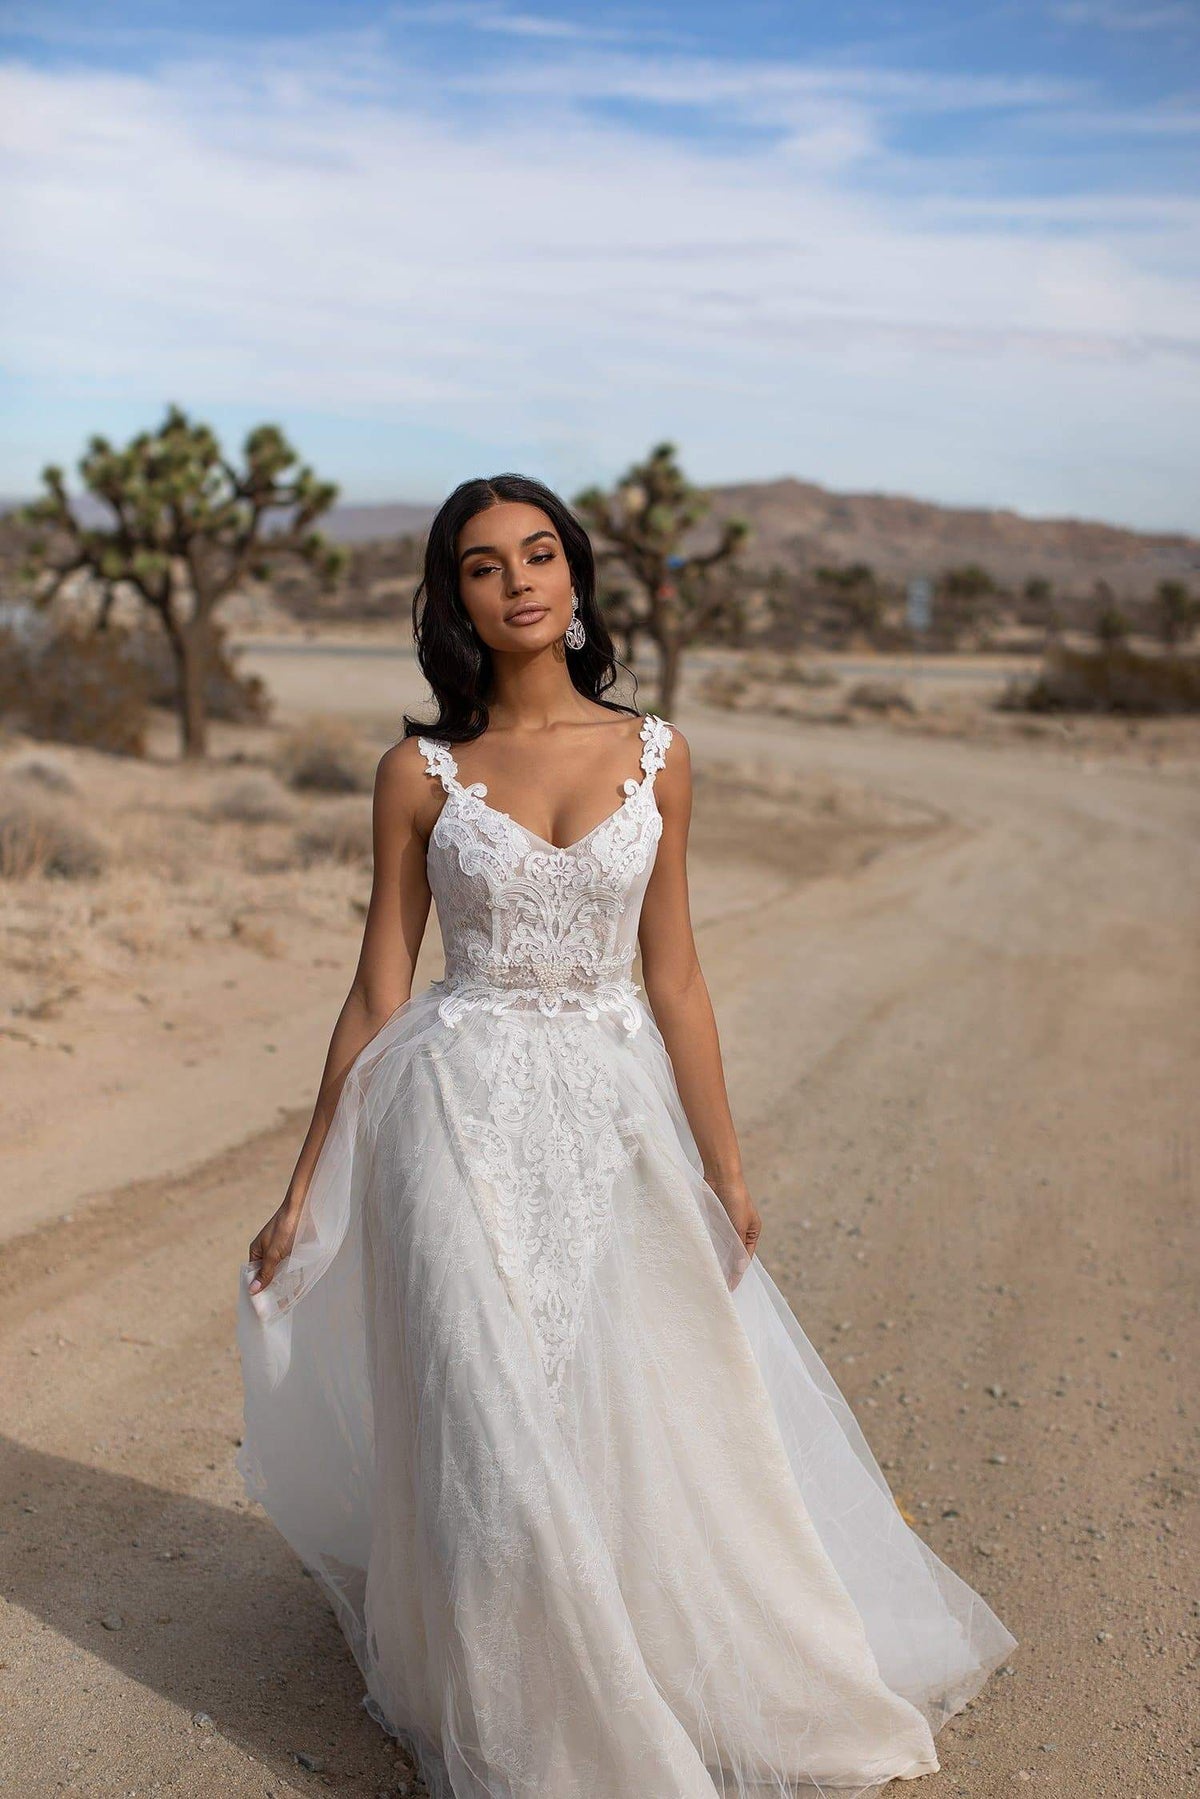 A&N Gaia - White Boho Bridal Gown with Lace Bodice & Tulle Skirt – A&N ...